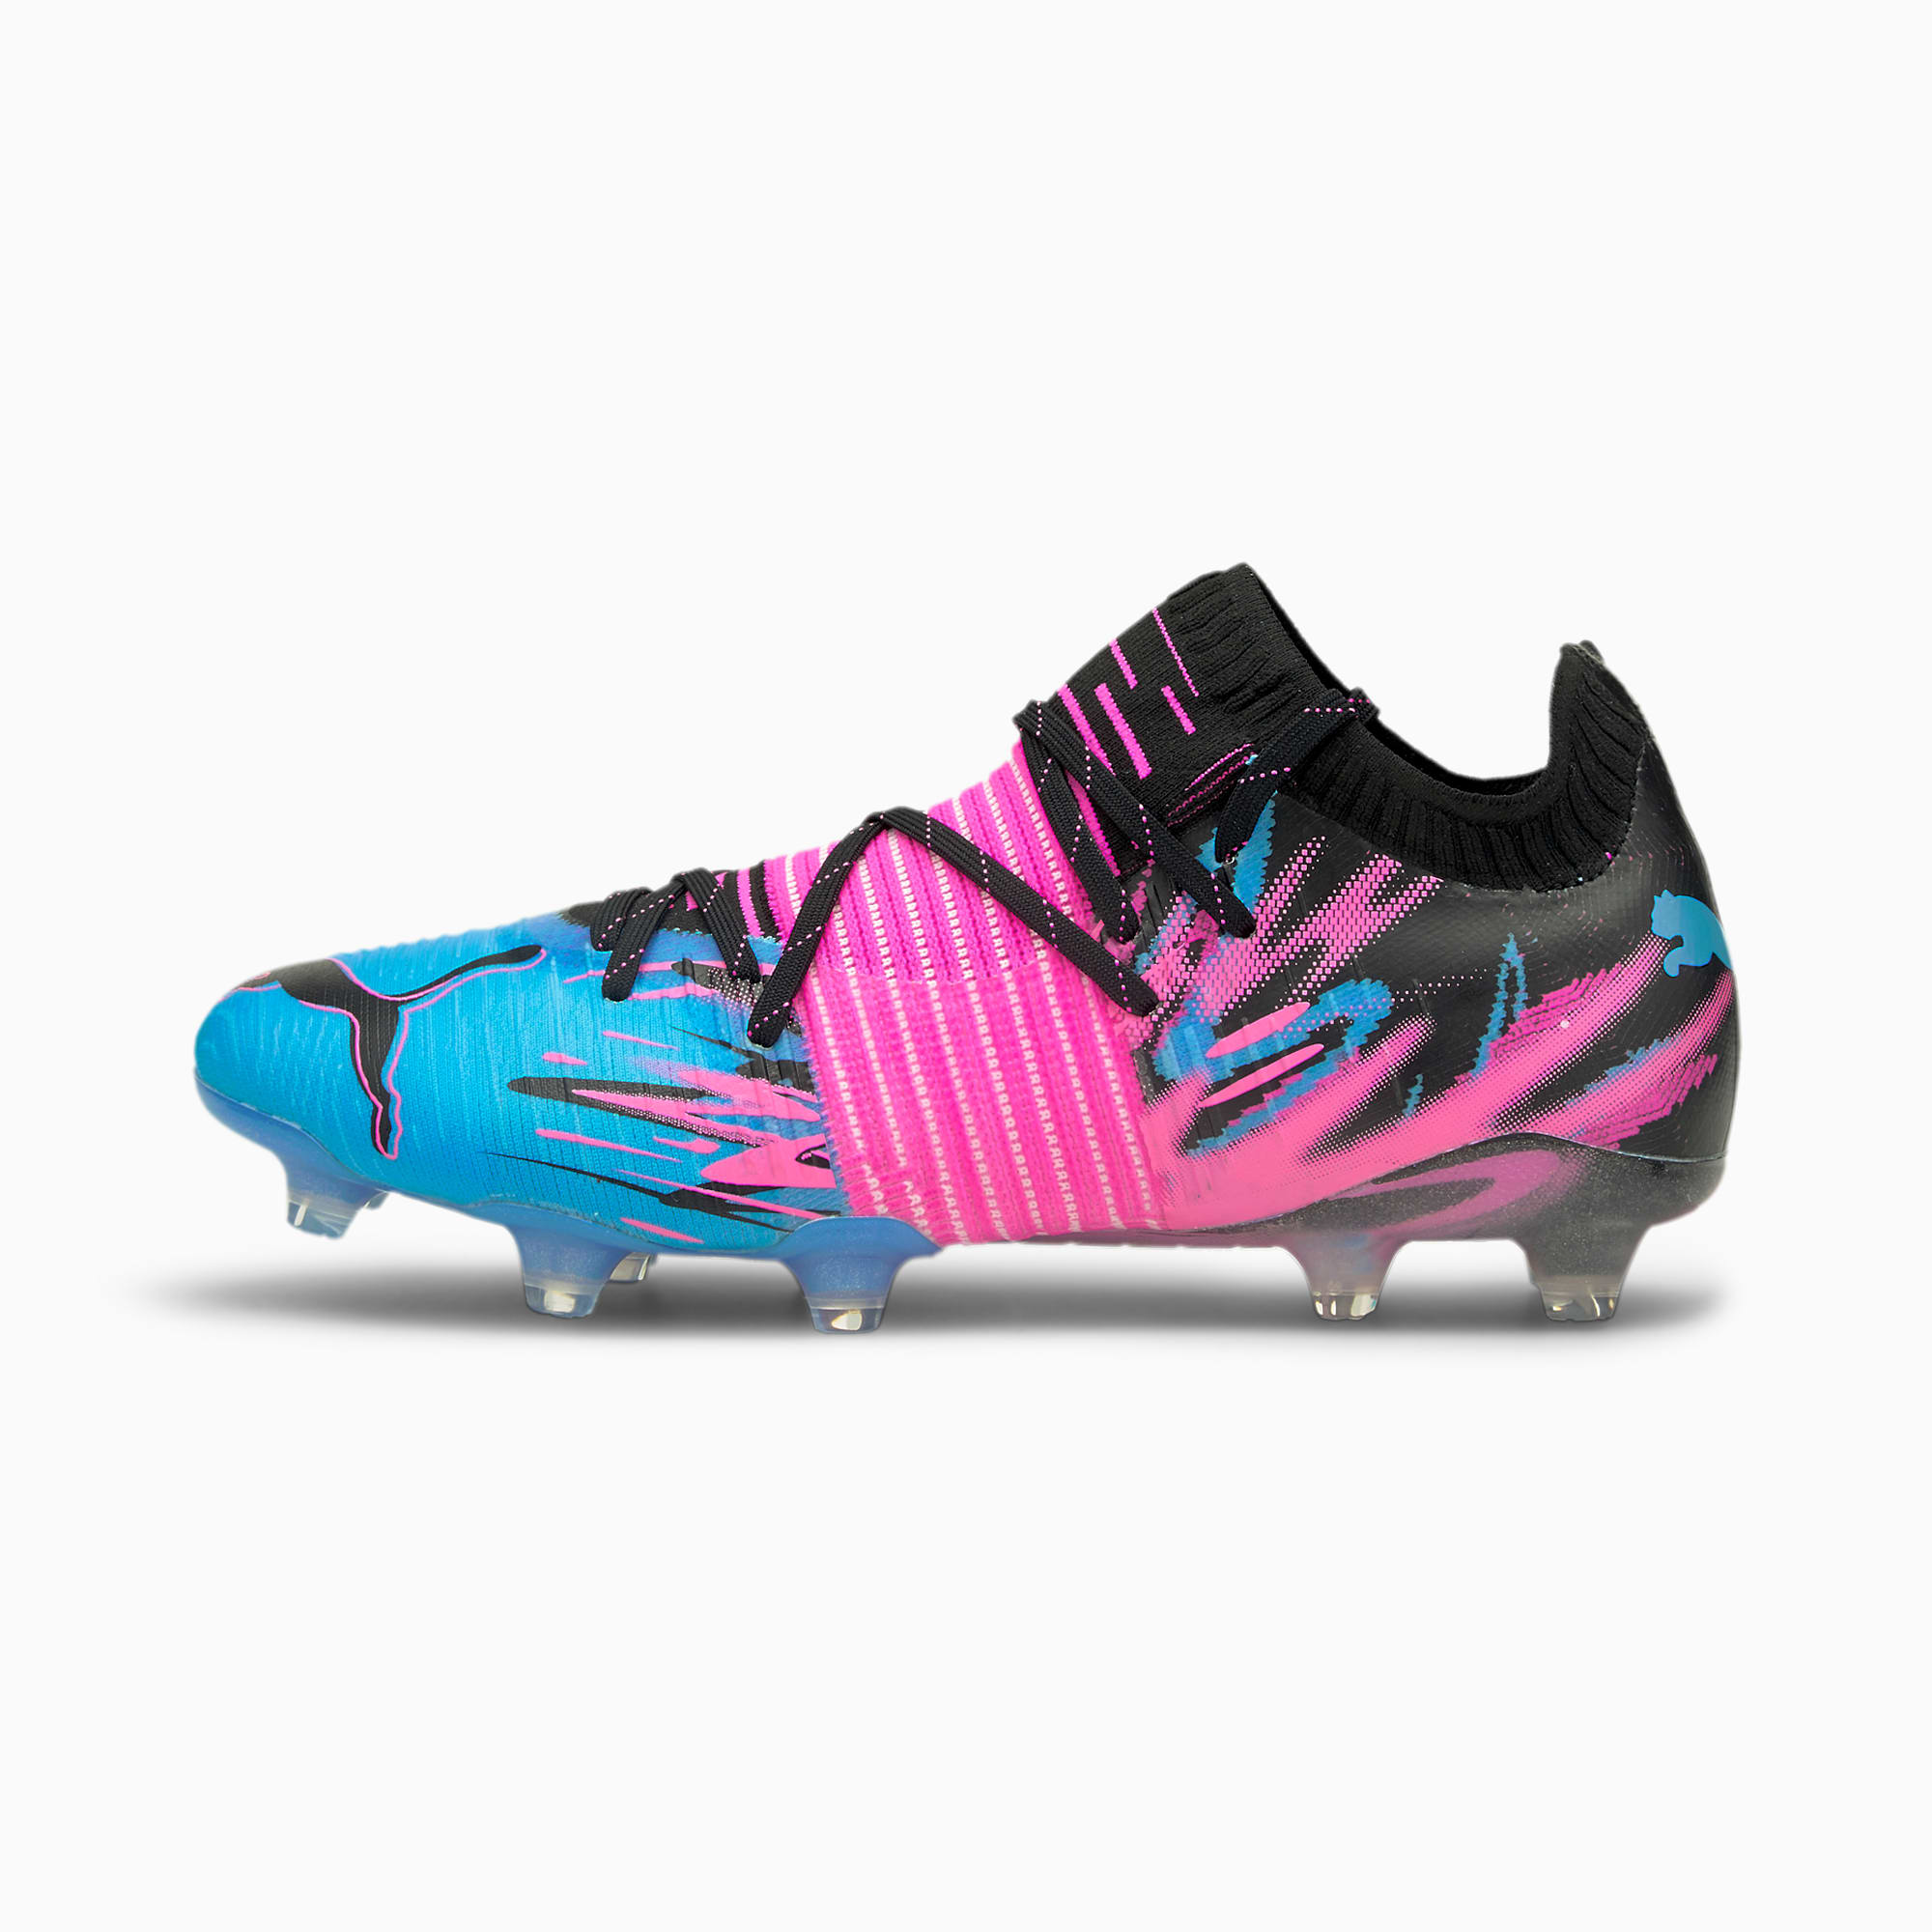 football shoes under 200